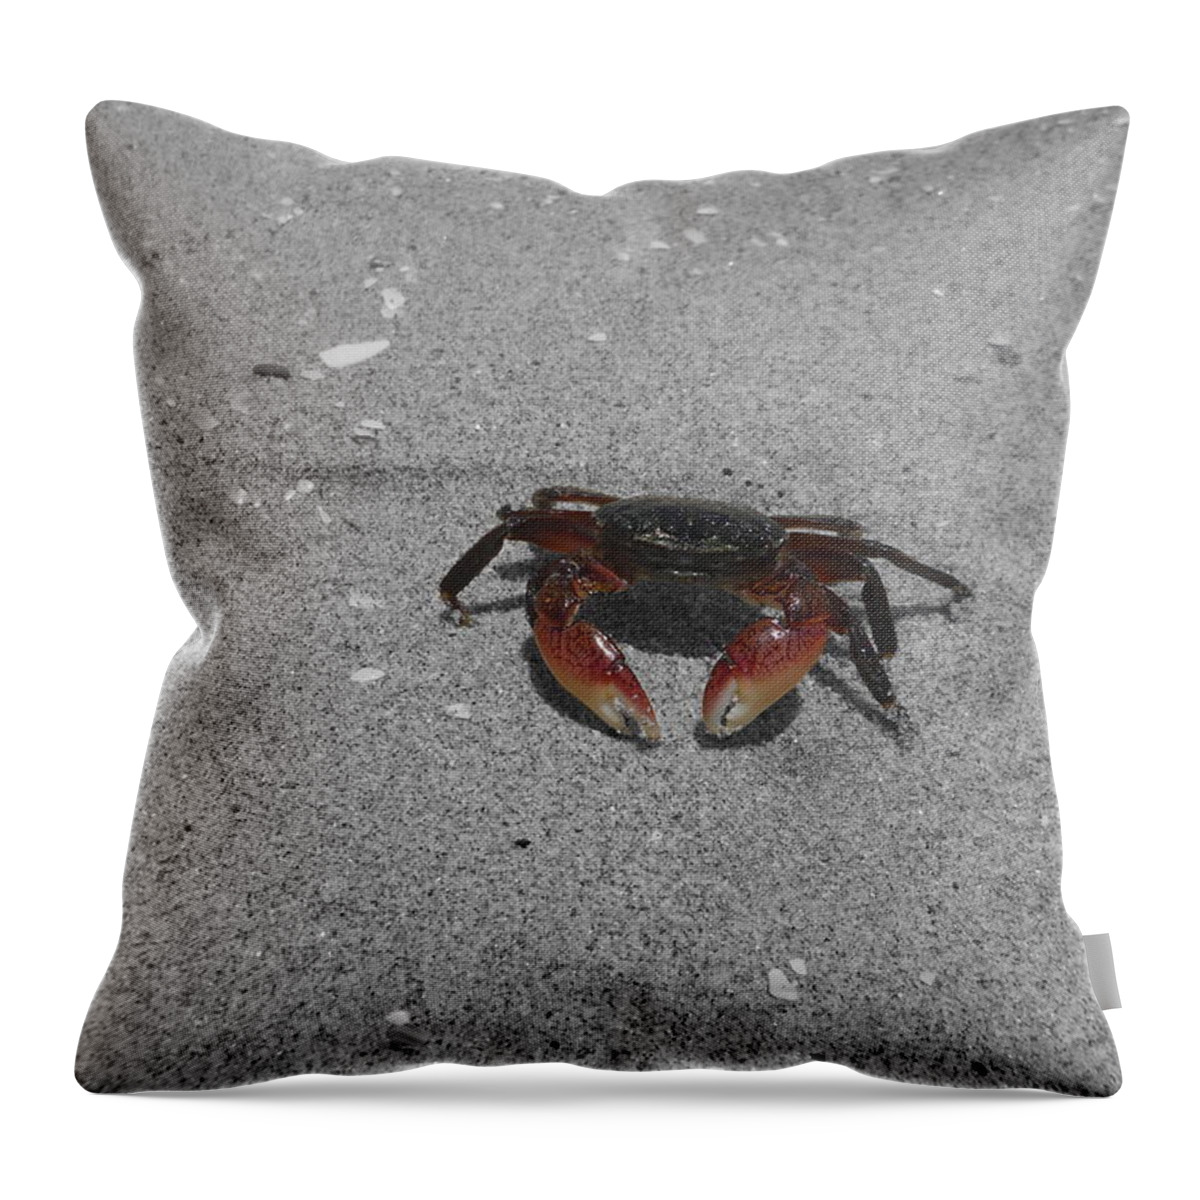 Digitally Enhanced Photograph Throw Pillow featuring the photograph Feeling Crabby by Colleen Cornelius